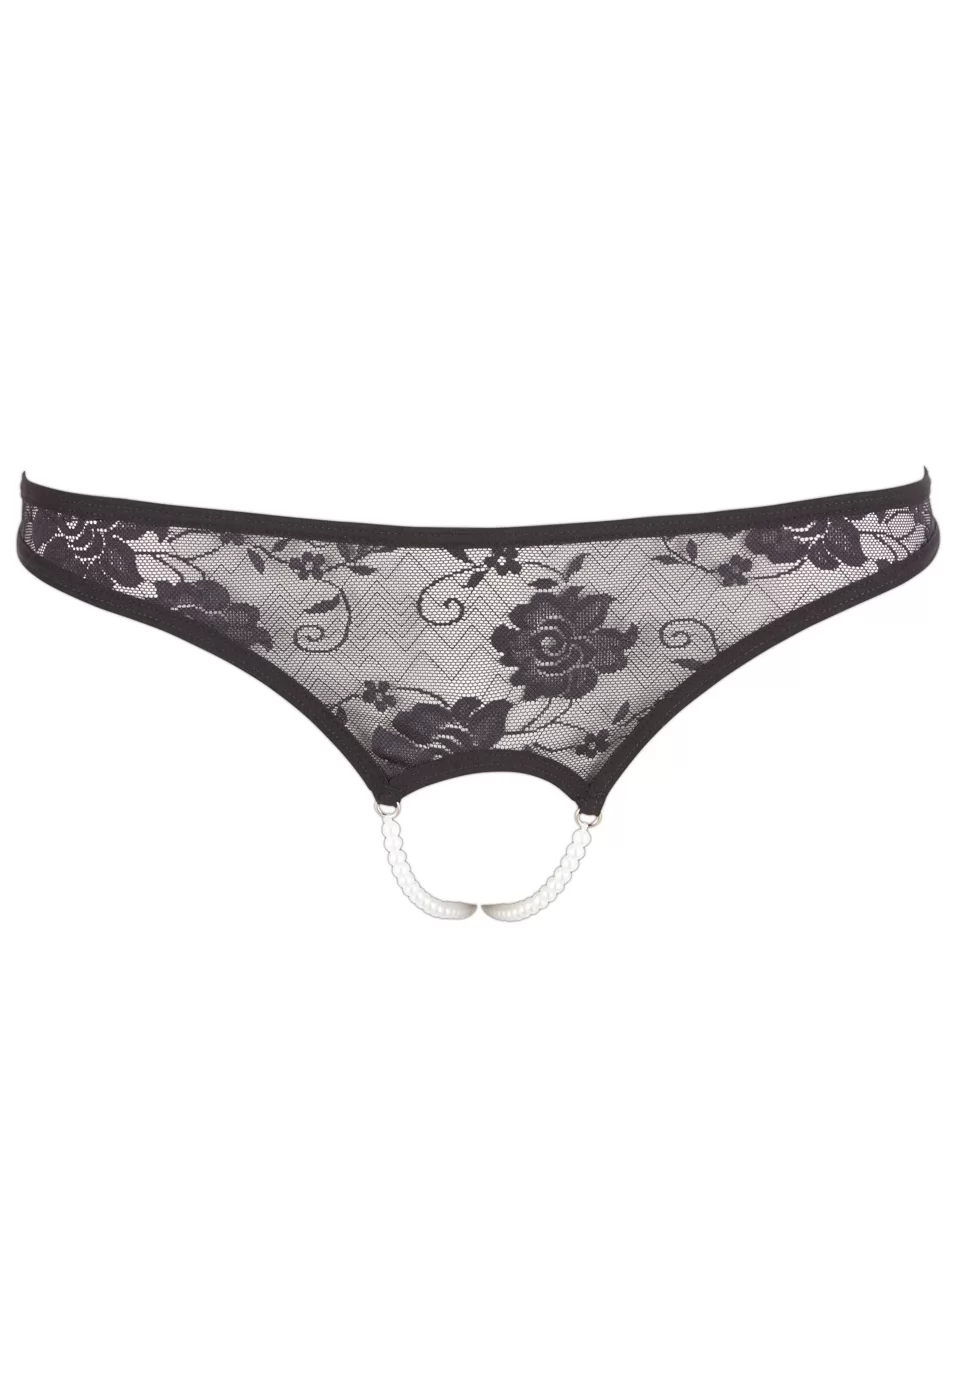 Black lace pearls crotchless panties